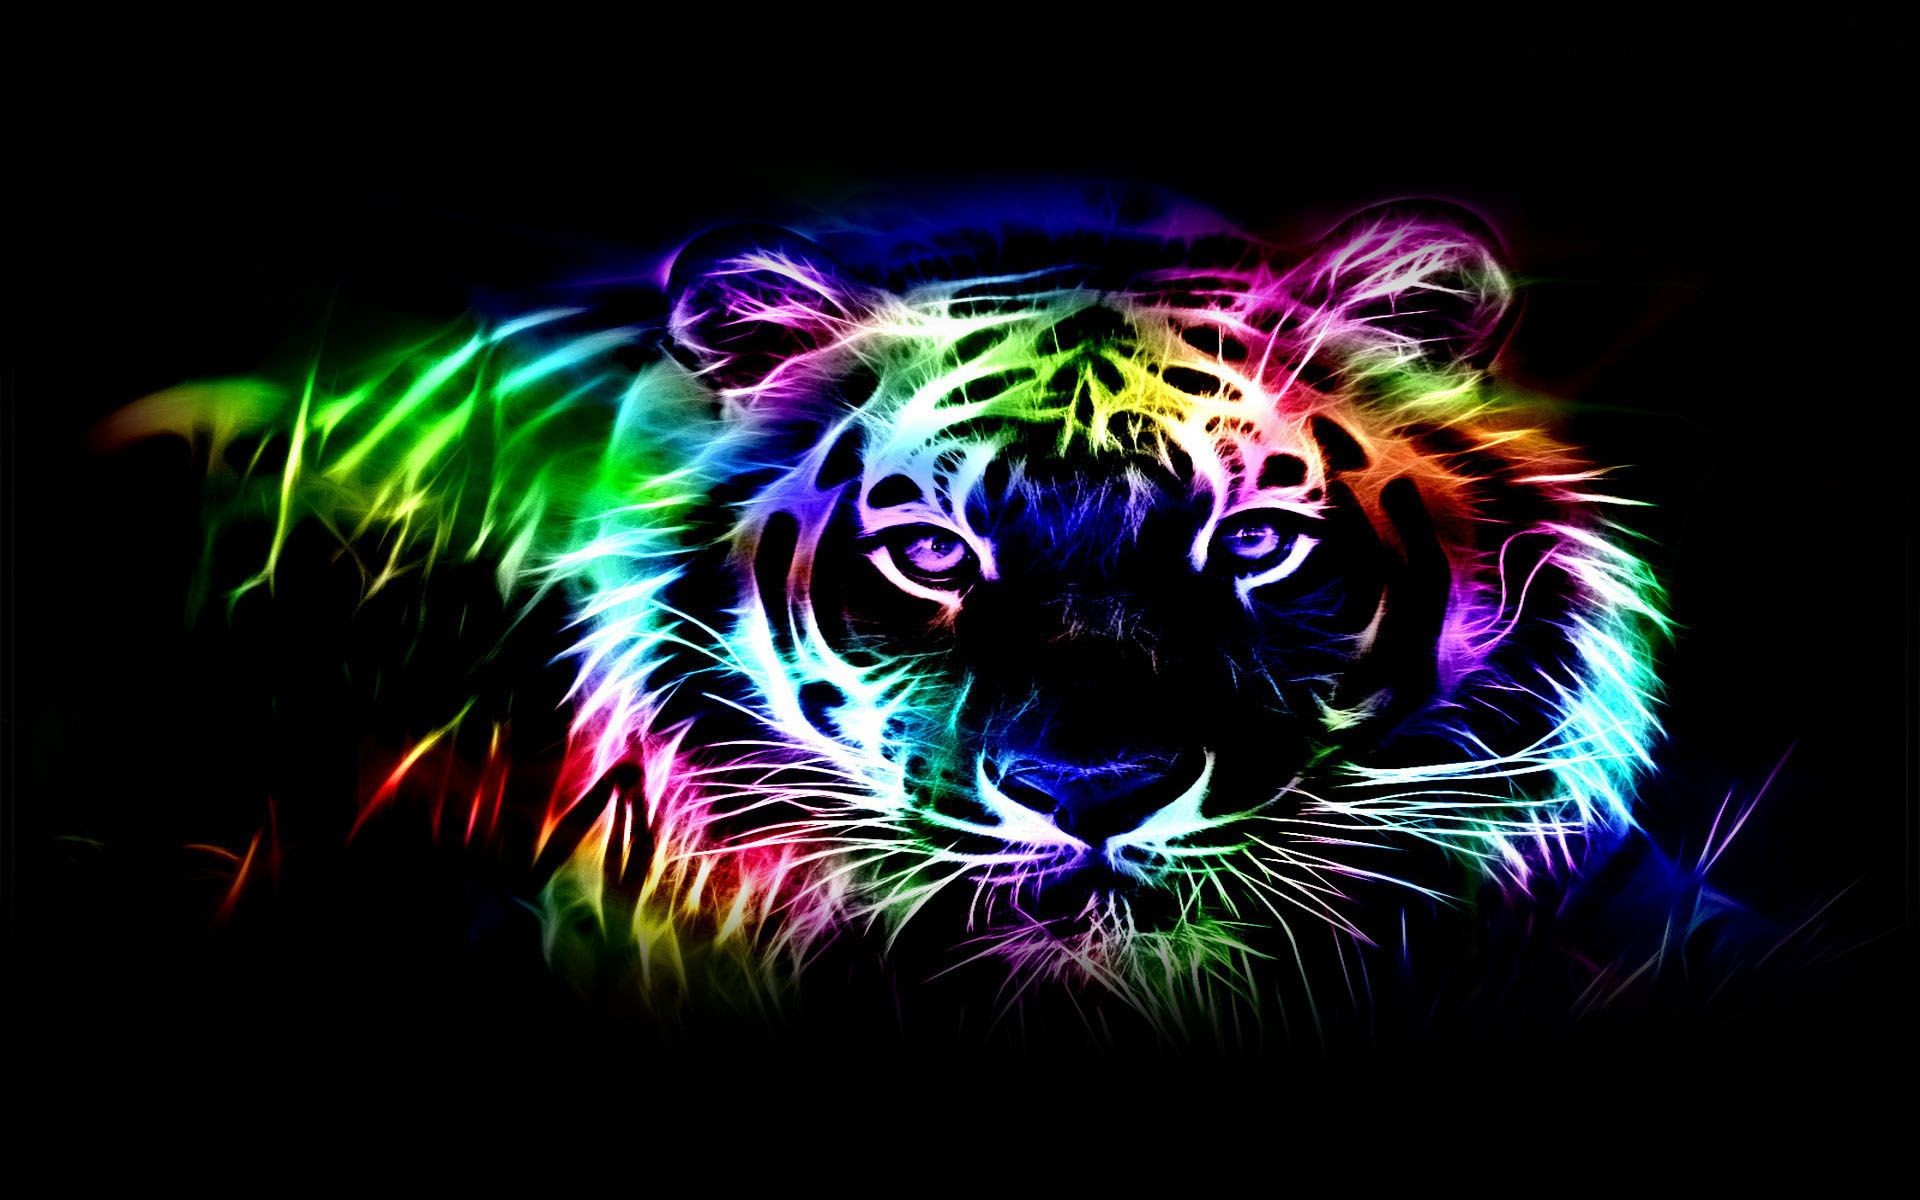 1440x2960 Tiger Colorful Art Samsung Galaxy Note 98 S9S8S8 QHD HD 4k  Wallpapers Images Backgrounds Photos and Pictures